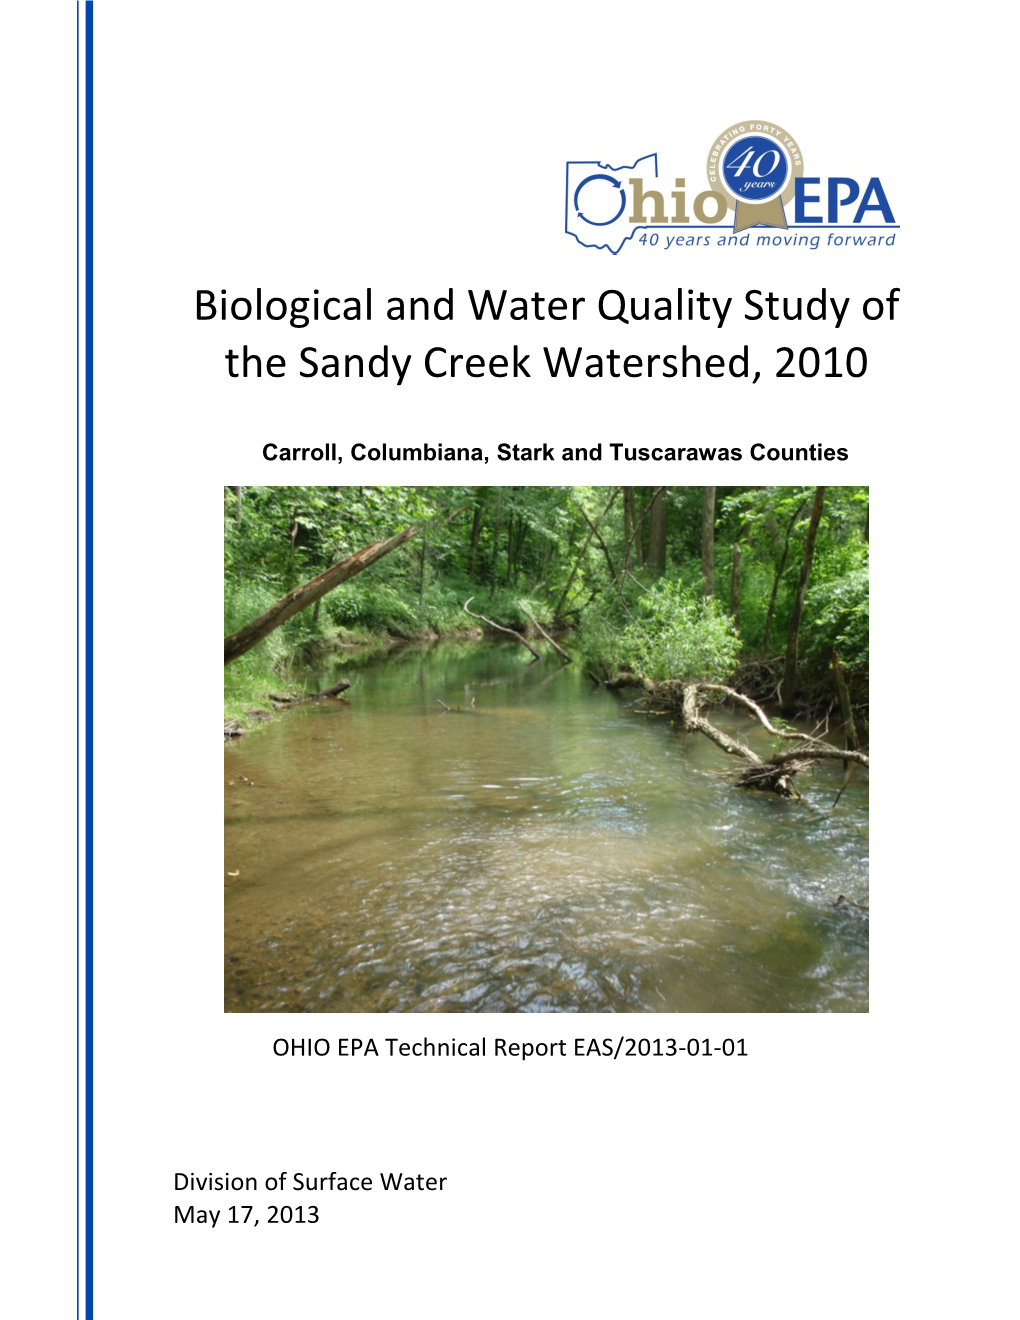 Biological and Water Quality Study of the Sandy Creek Watershed, 2010